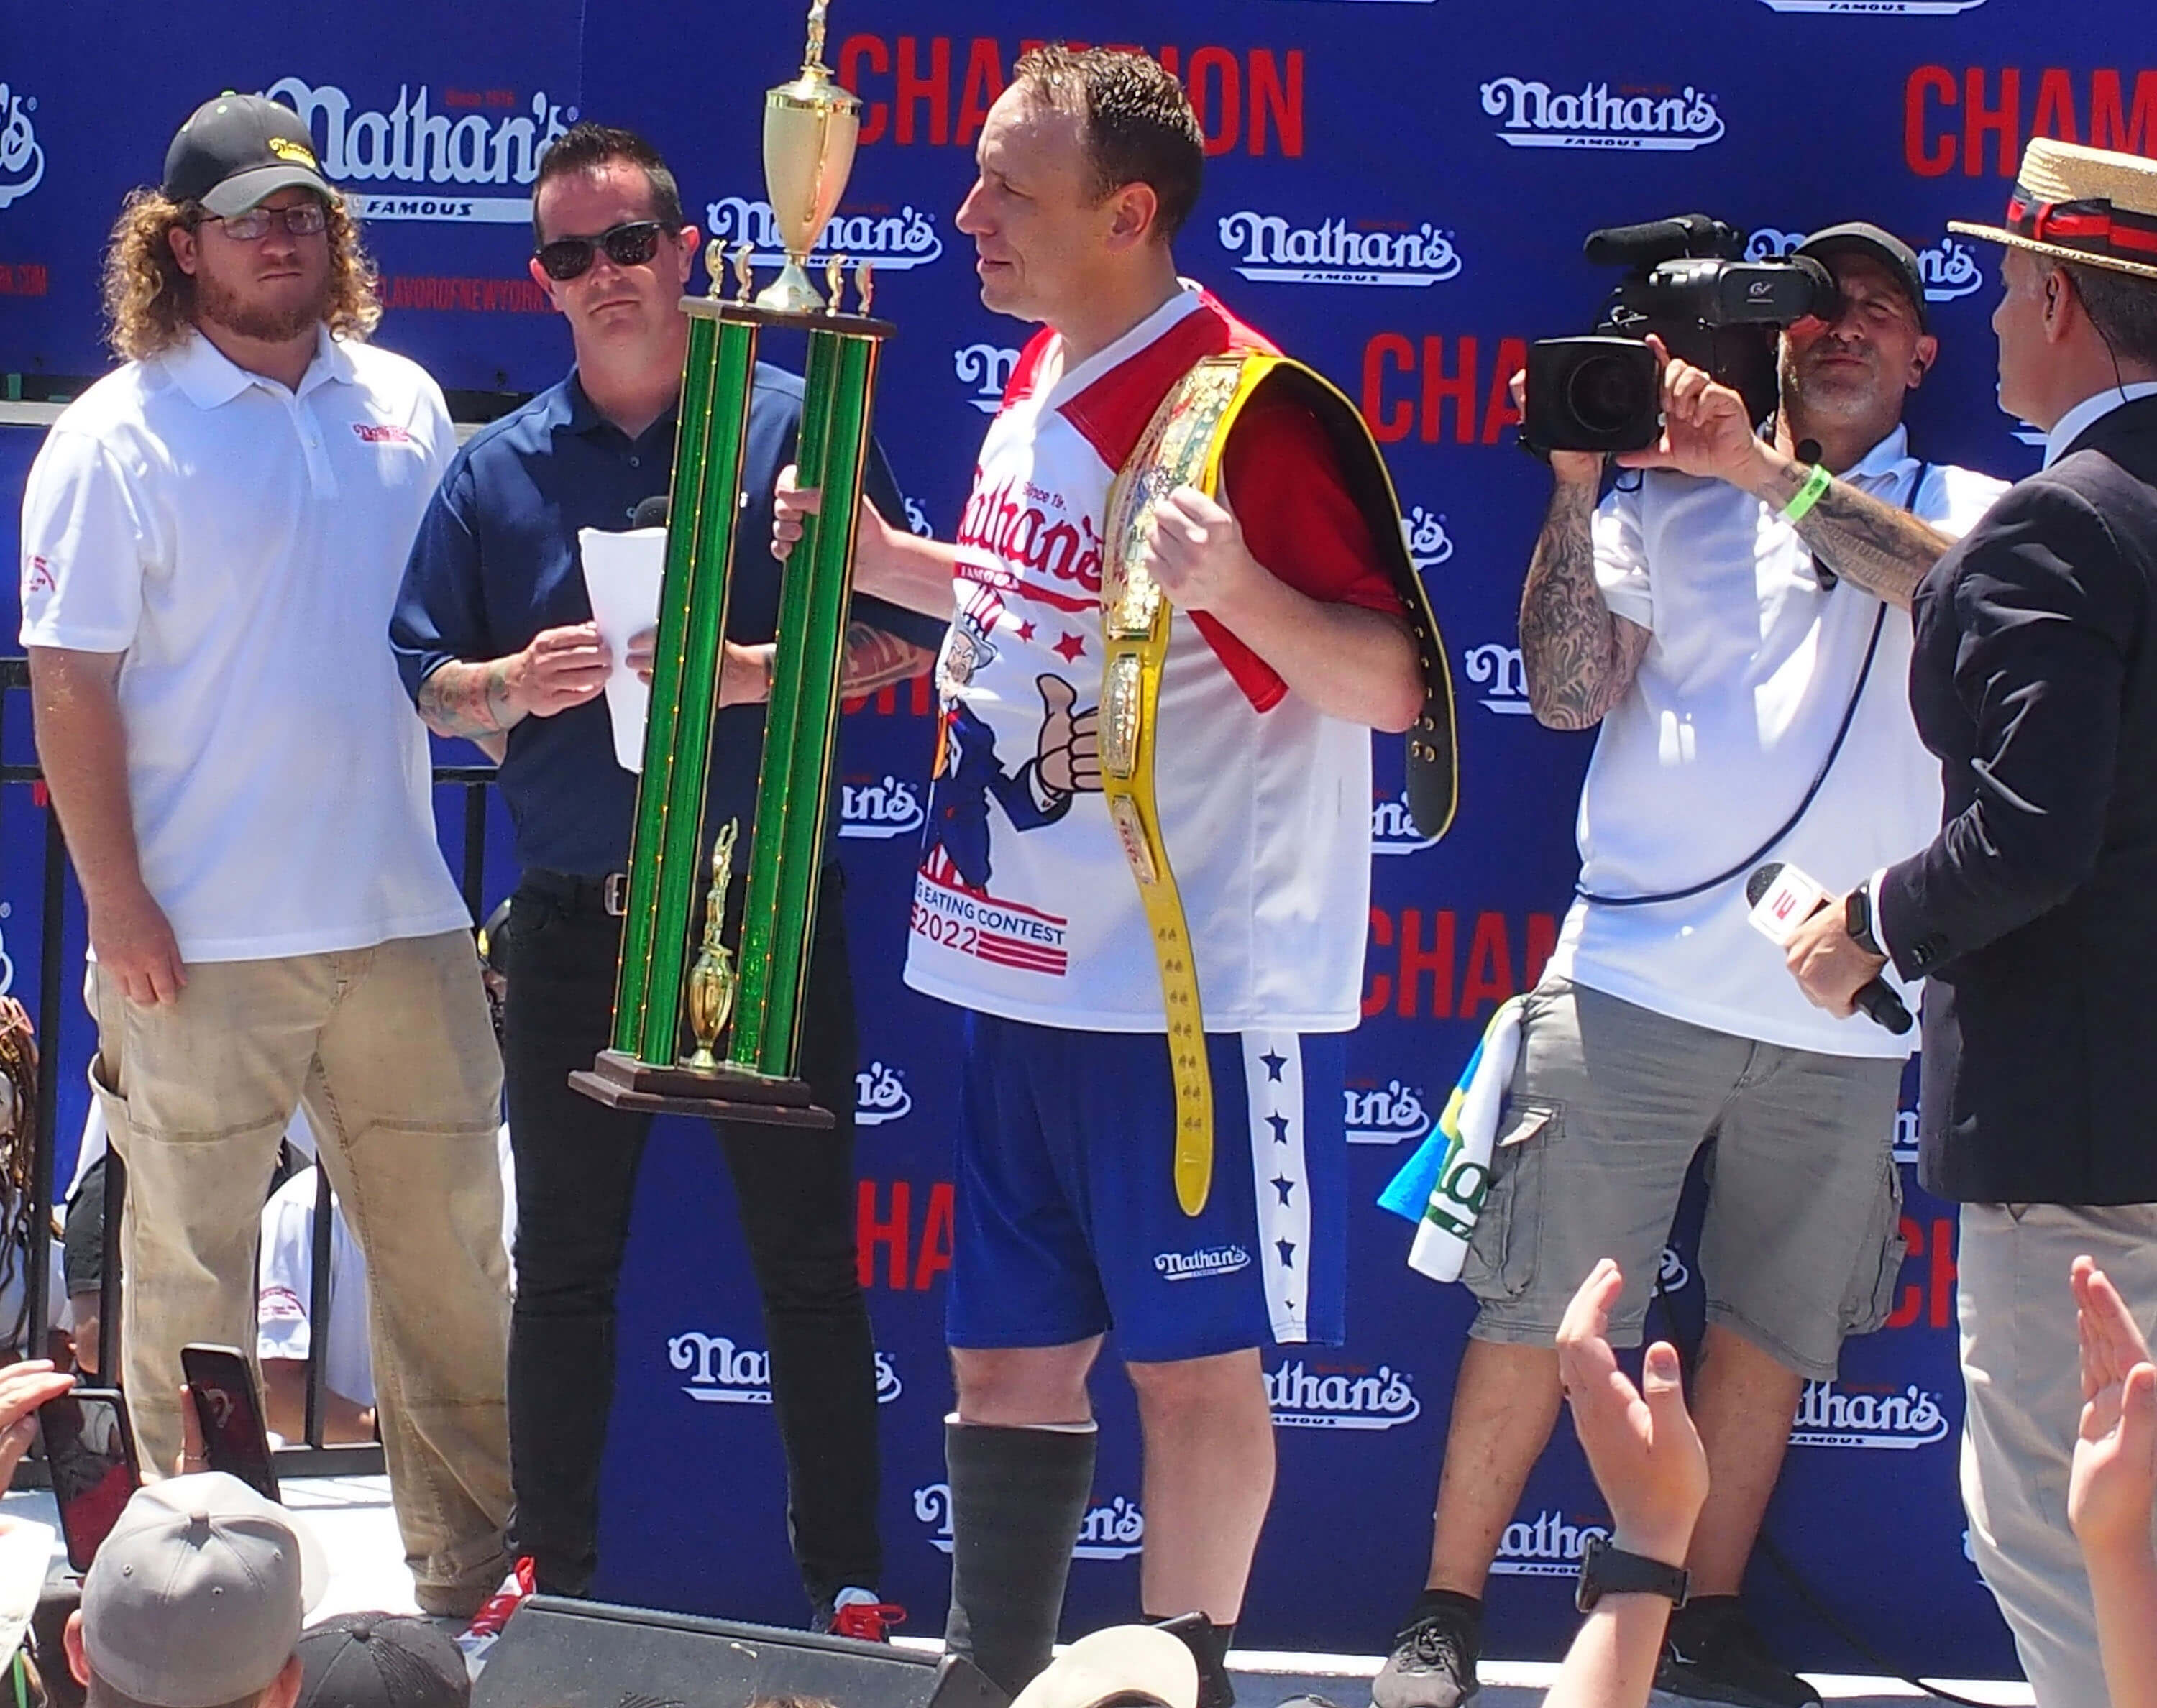 Competitive eater Joey Chestnut wins with 63 hot dogs.